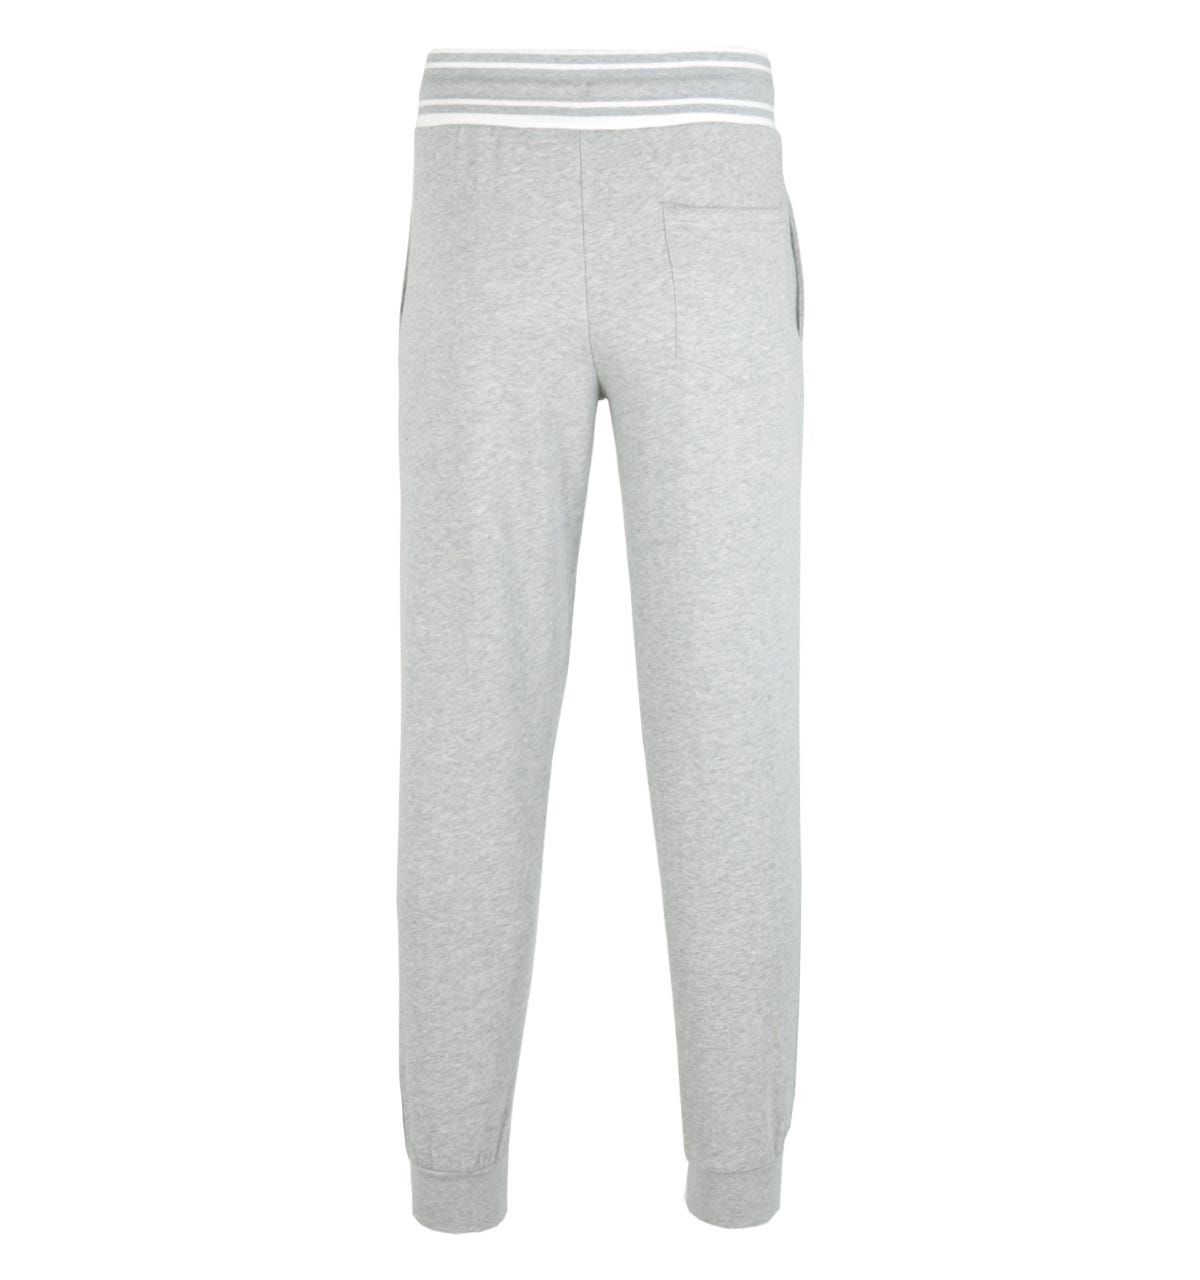 <p>Upgrade your wardrobe with the Collegiate Logo Crest Joggers in Heather Grey by True Religion\nTrue Religion are global denim experts who have redesigned and reinvented the traditional 5 pocket jean. They were founded in L.A. back in 2002 and quickly became known for quality craftsmanship, bold design and the iconic lucky horseshoe logo.</p><ul><li>Cotton blend construction</li><li>Elastic waistband</li><li>Tapered ankle hem</li><li>On-seam side pockets</li><li>Back patch pocket</li><li>Varsity-inspired chenille horseshoe crest at the hip</li></ul><p>Style & Fit:</p><ul><li>Regular fit</li><li>Joggers</li></ul><p>Fabric Composition & Care:</p><ul><li>60% Cotton 40% Polyester</li><li>Machine wash</li></ul>